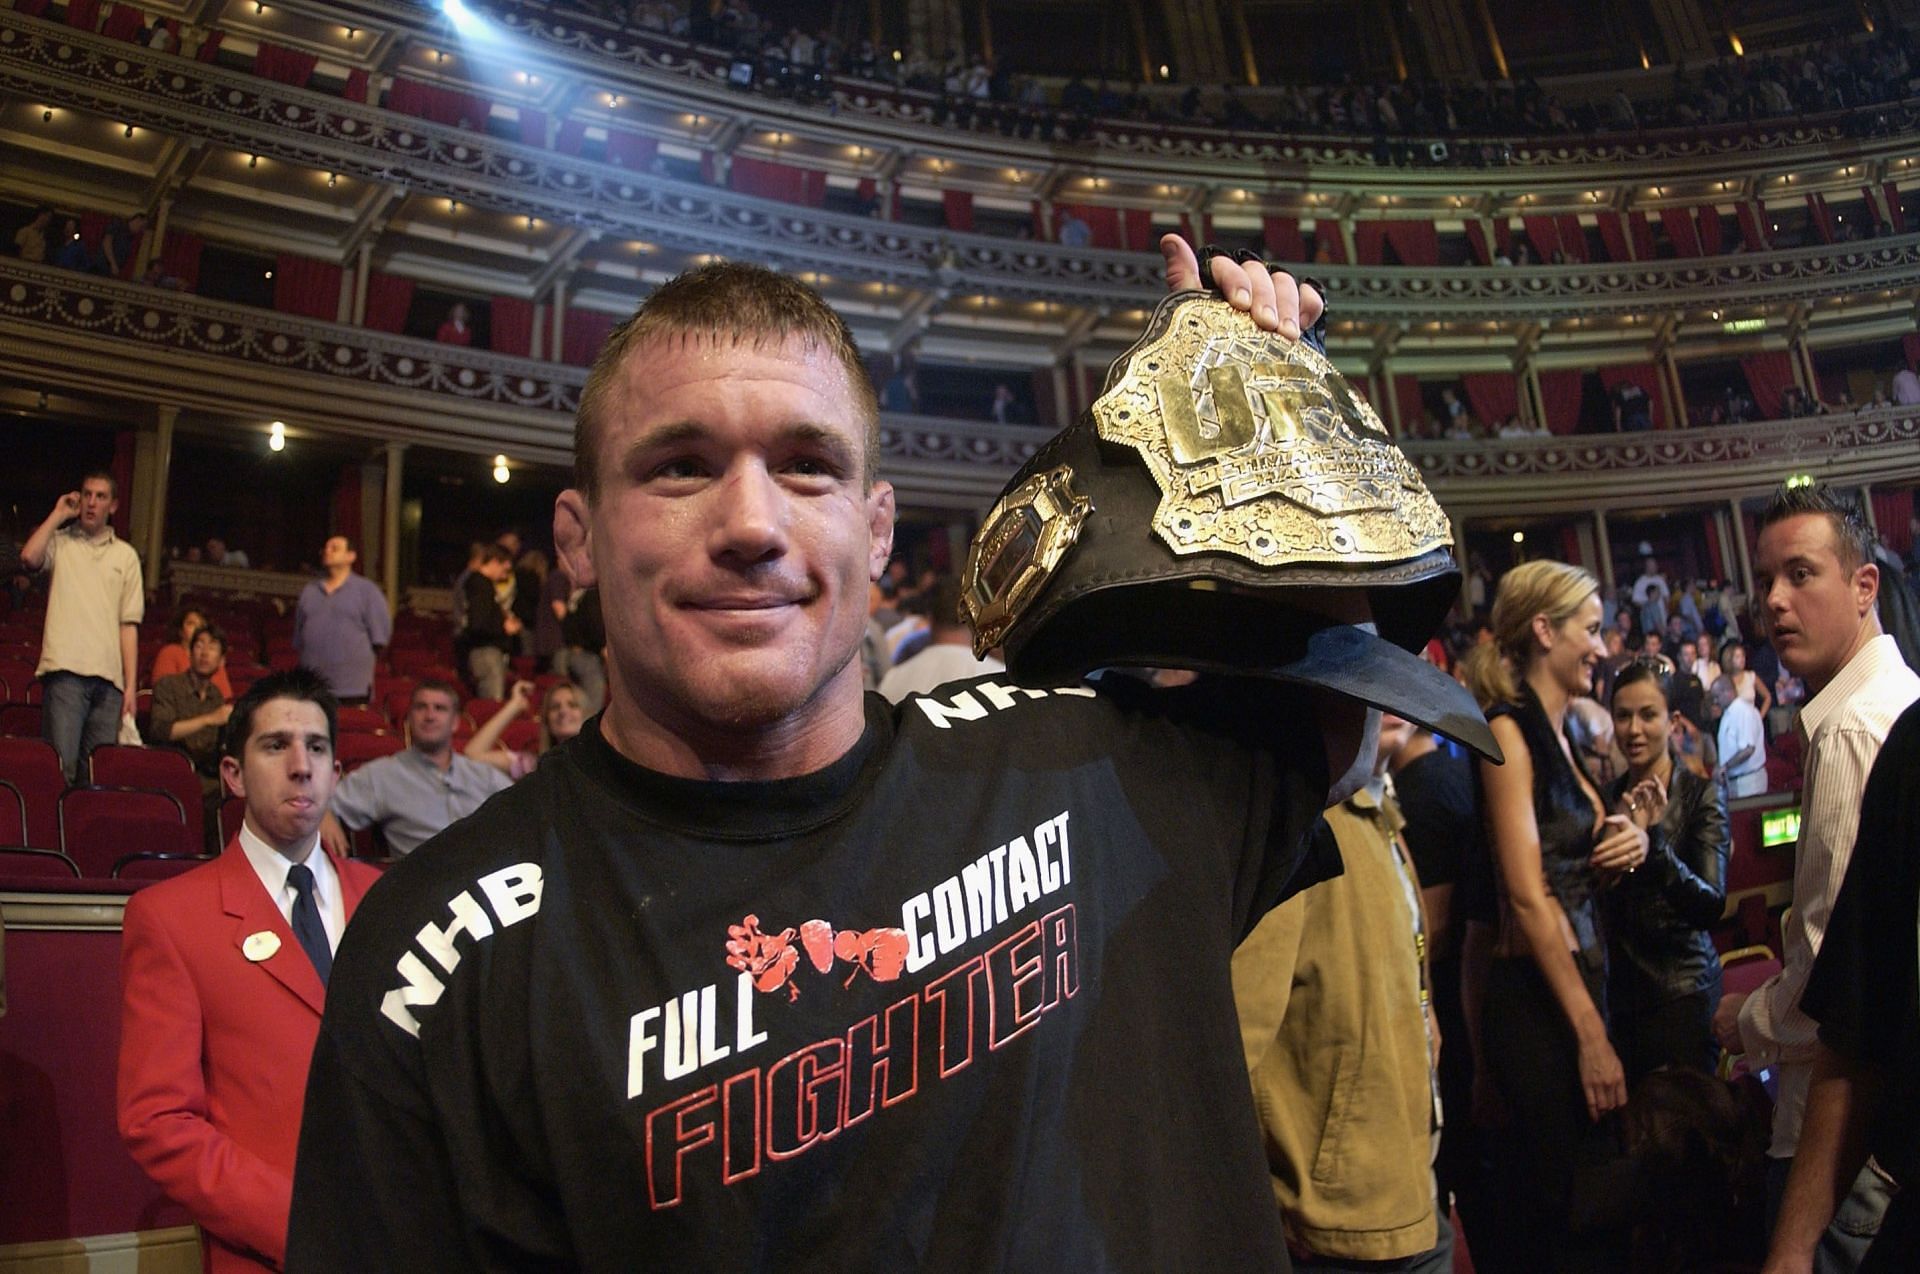 Matt Hughes defended his welterweight title in the headliner of the first UFC event in the UK